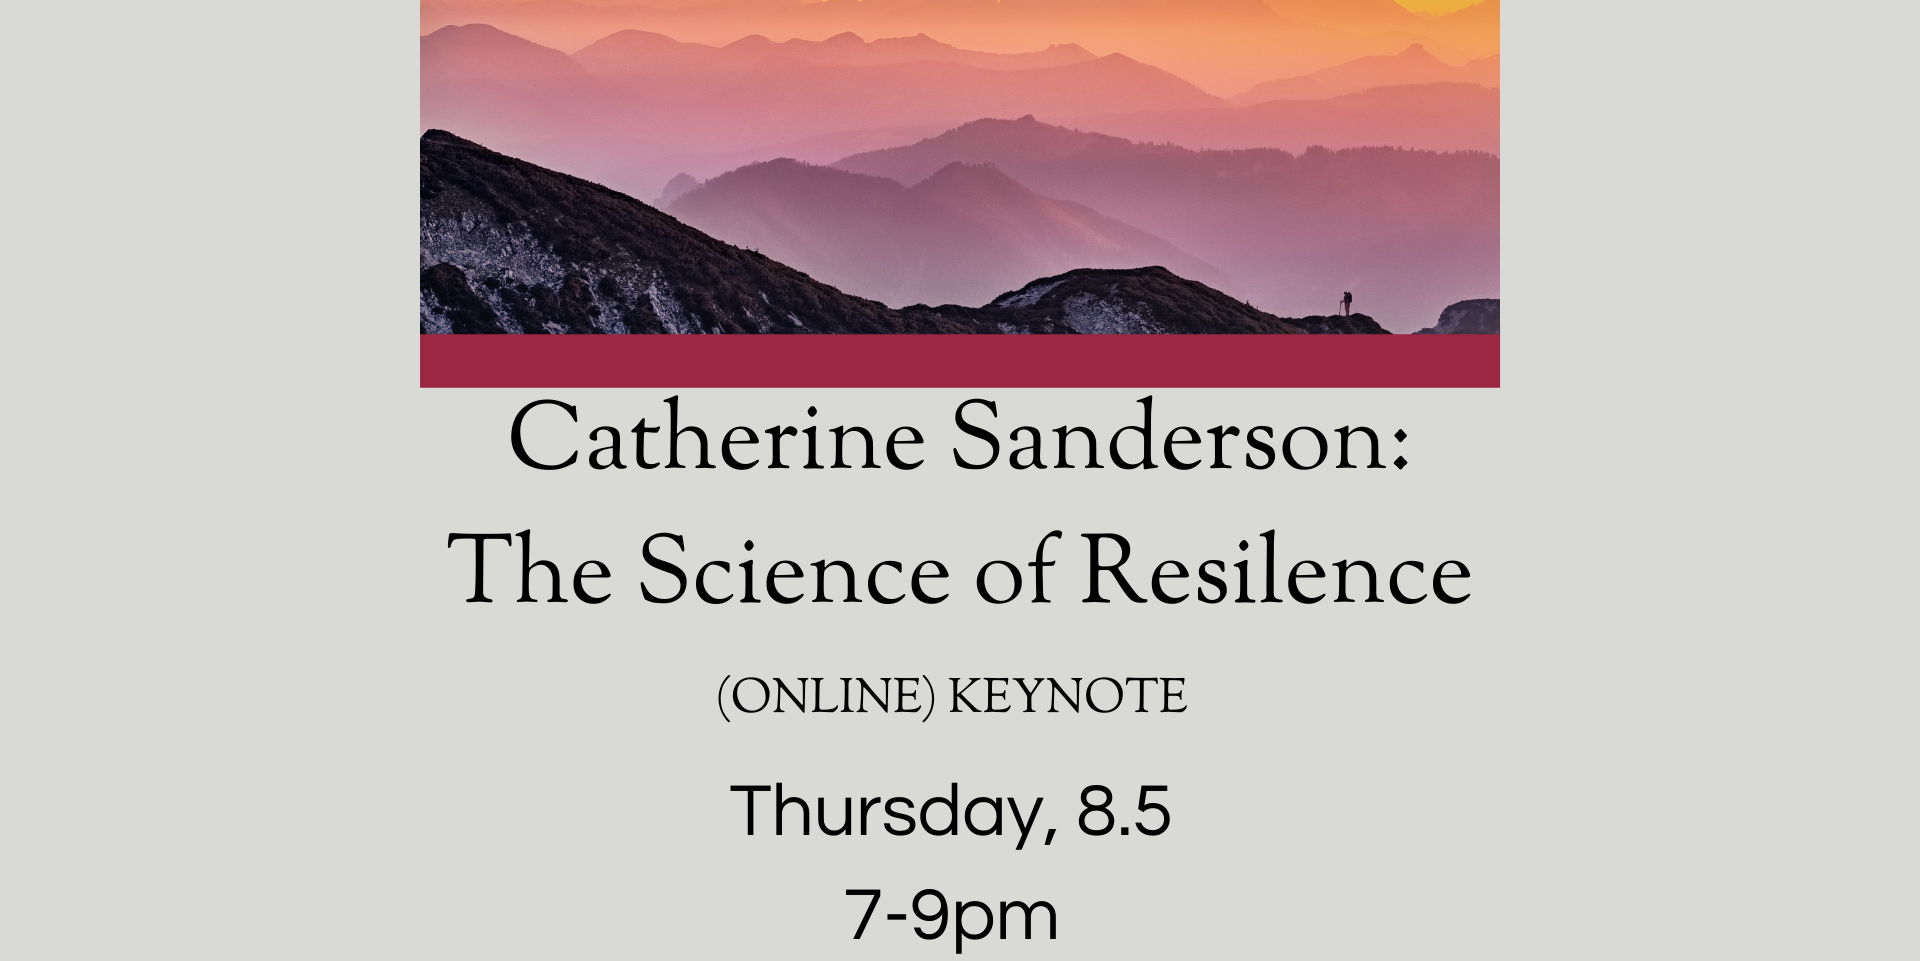 Summer Keynote with Catherine Sanderson: The Science of Resilience promotional image